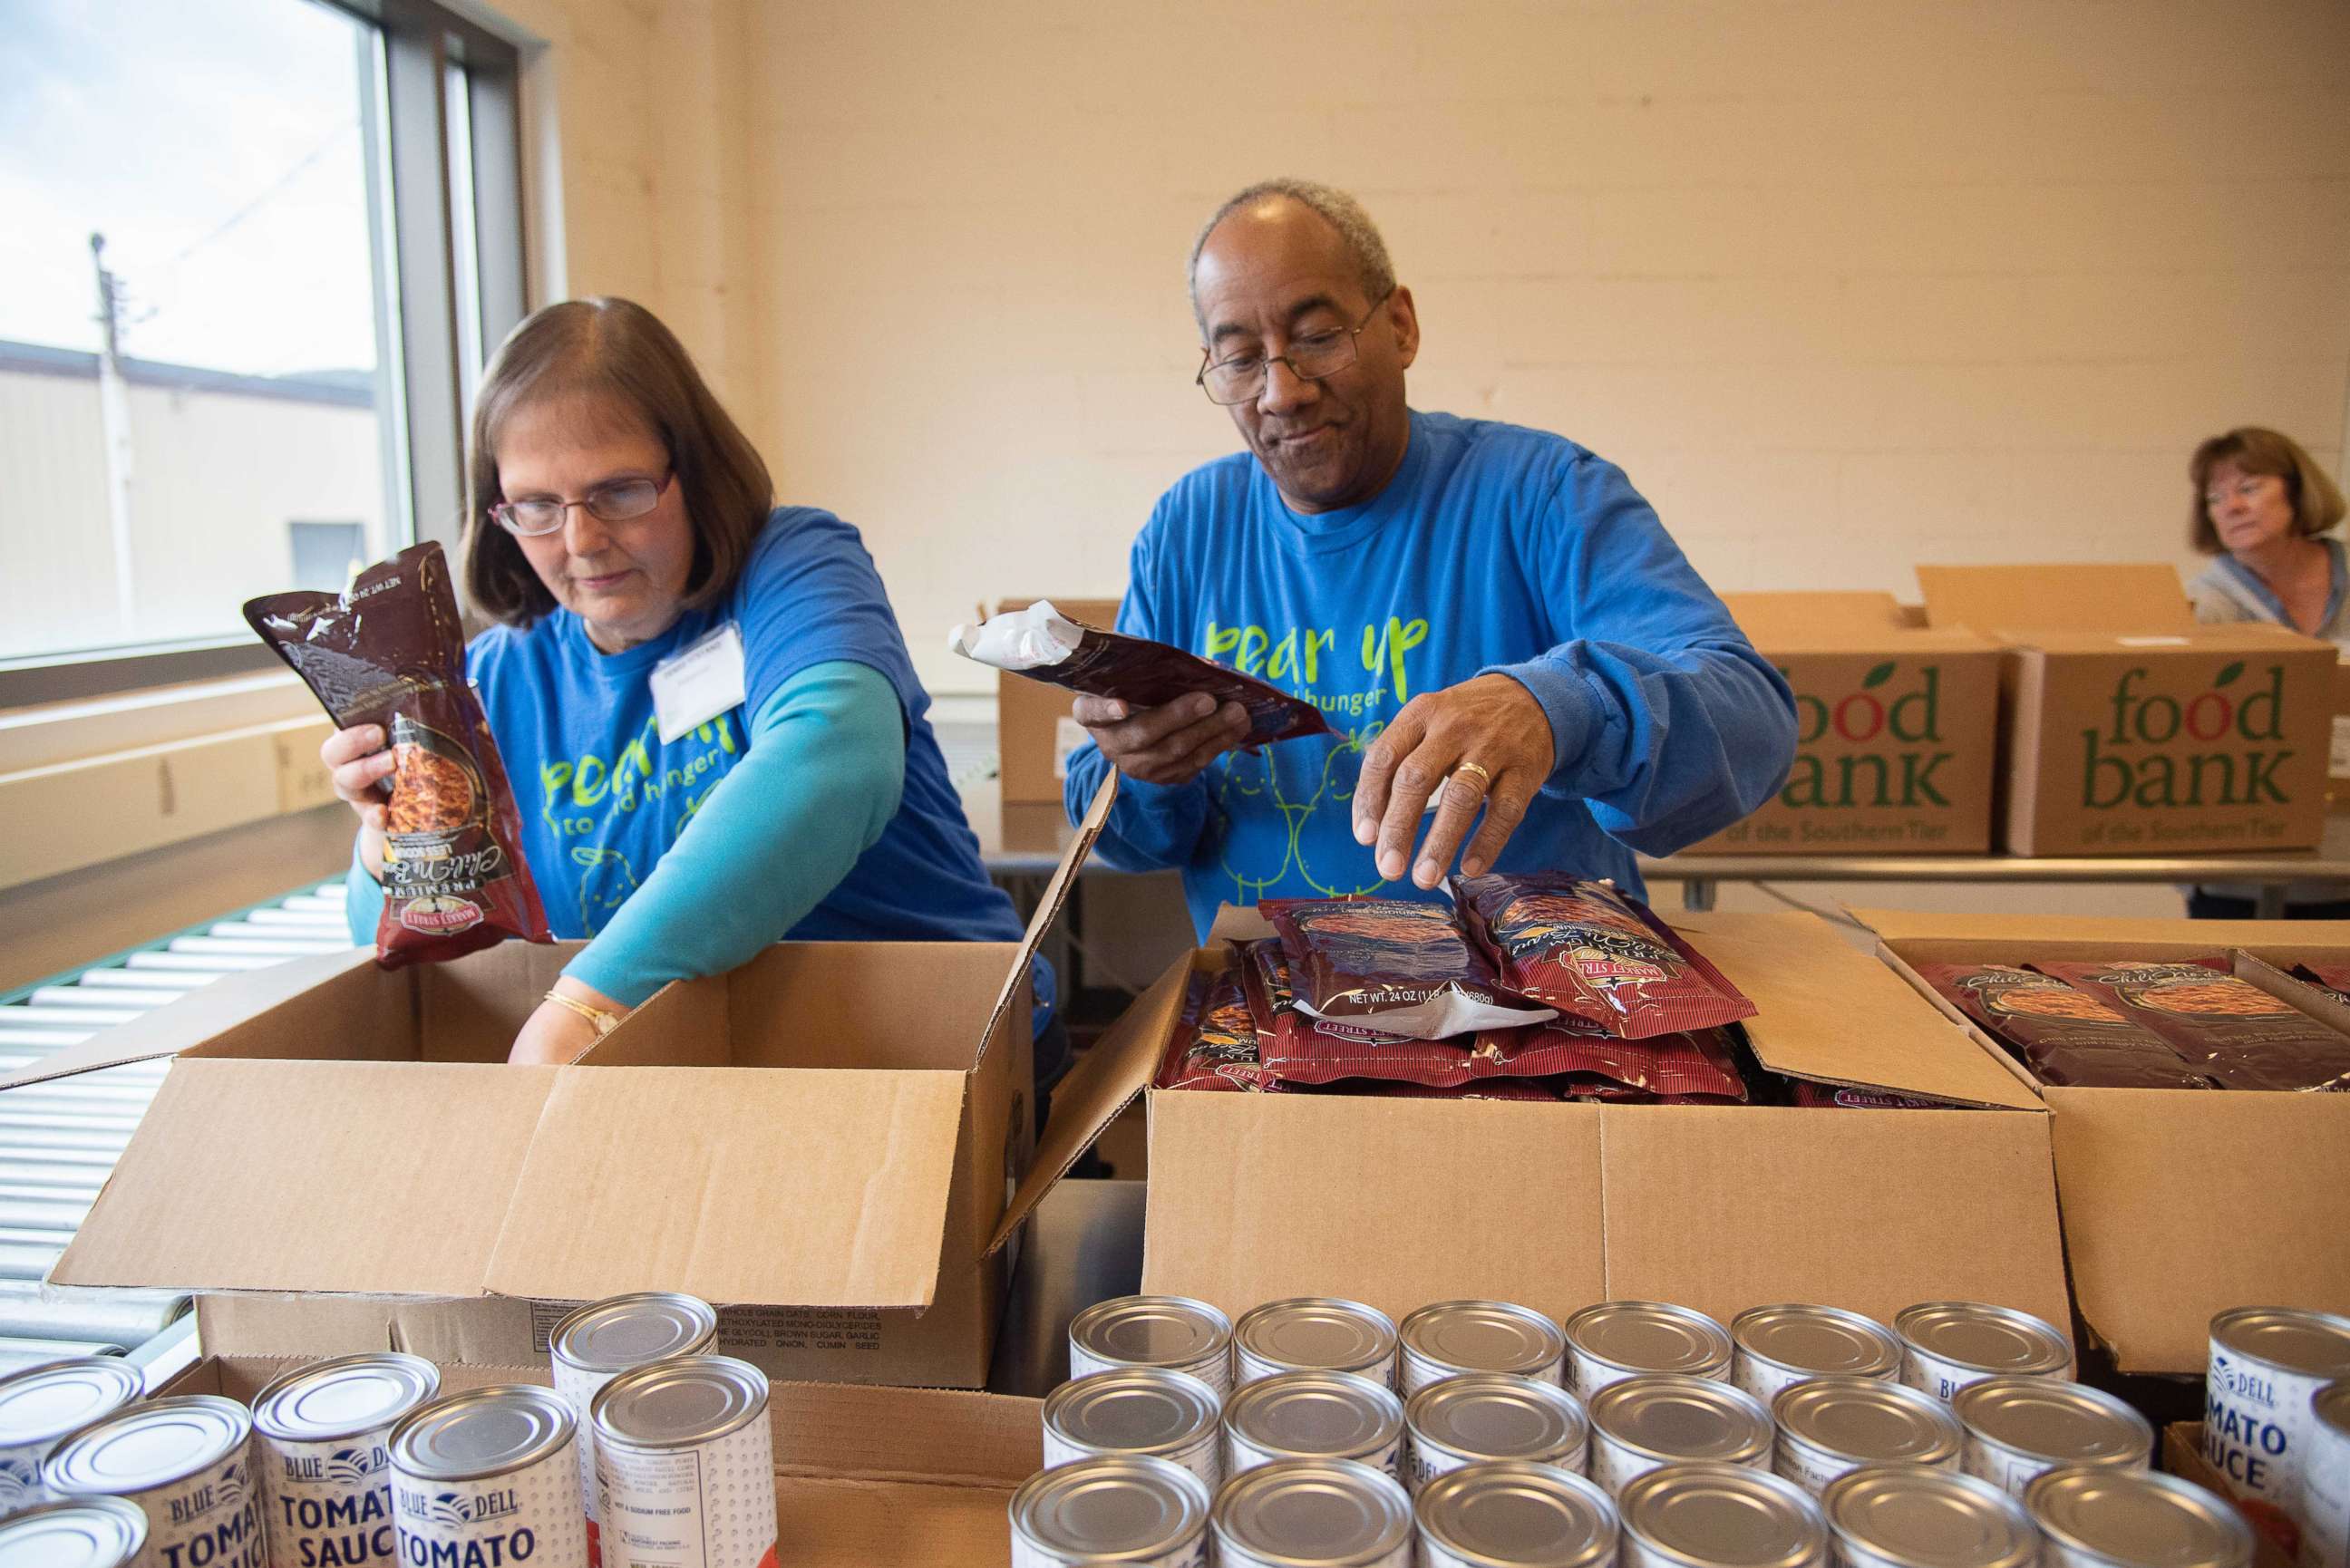 PHOTO: Volunteers at Food Bank of the Southern Tier in Upstate New York pack emergency food boxes and bag produce for drop and go delivery at Mobile Food Pantry sites and for distribution through regional school districts.